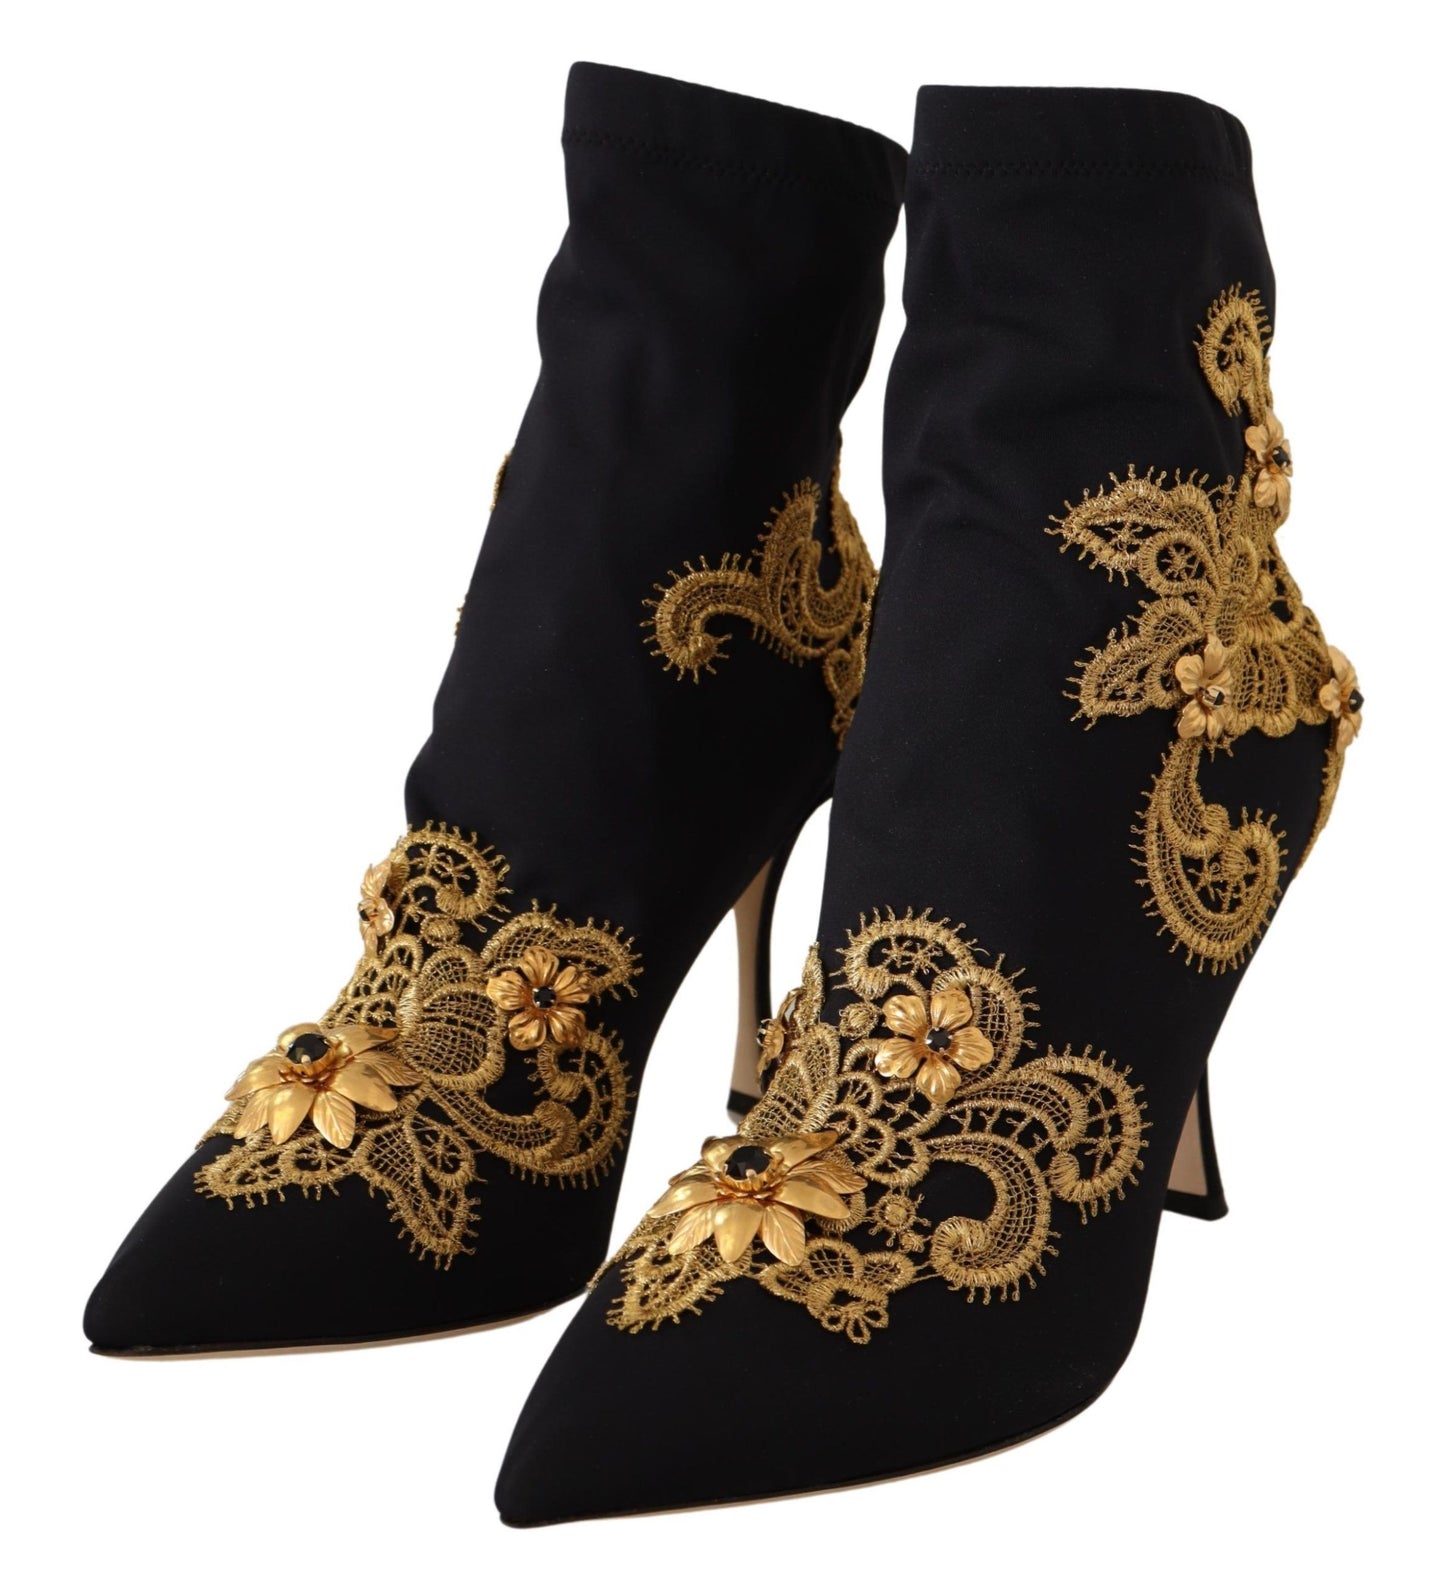 Elegant Black Lori Ankle Boots with Gold Details